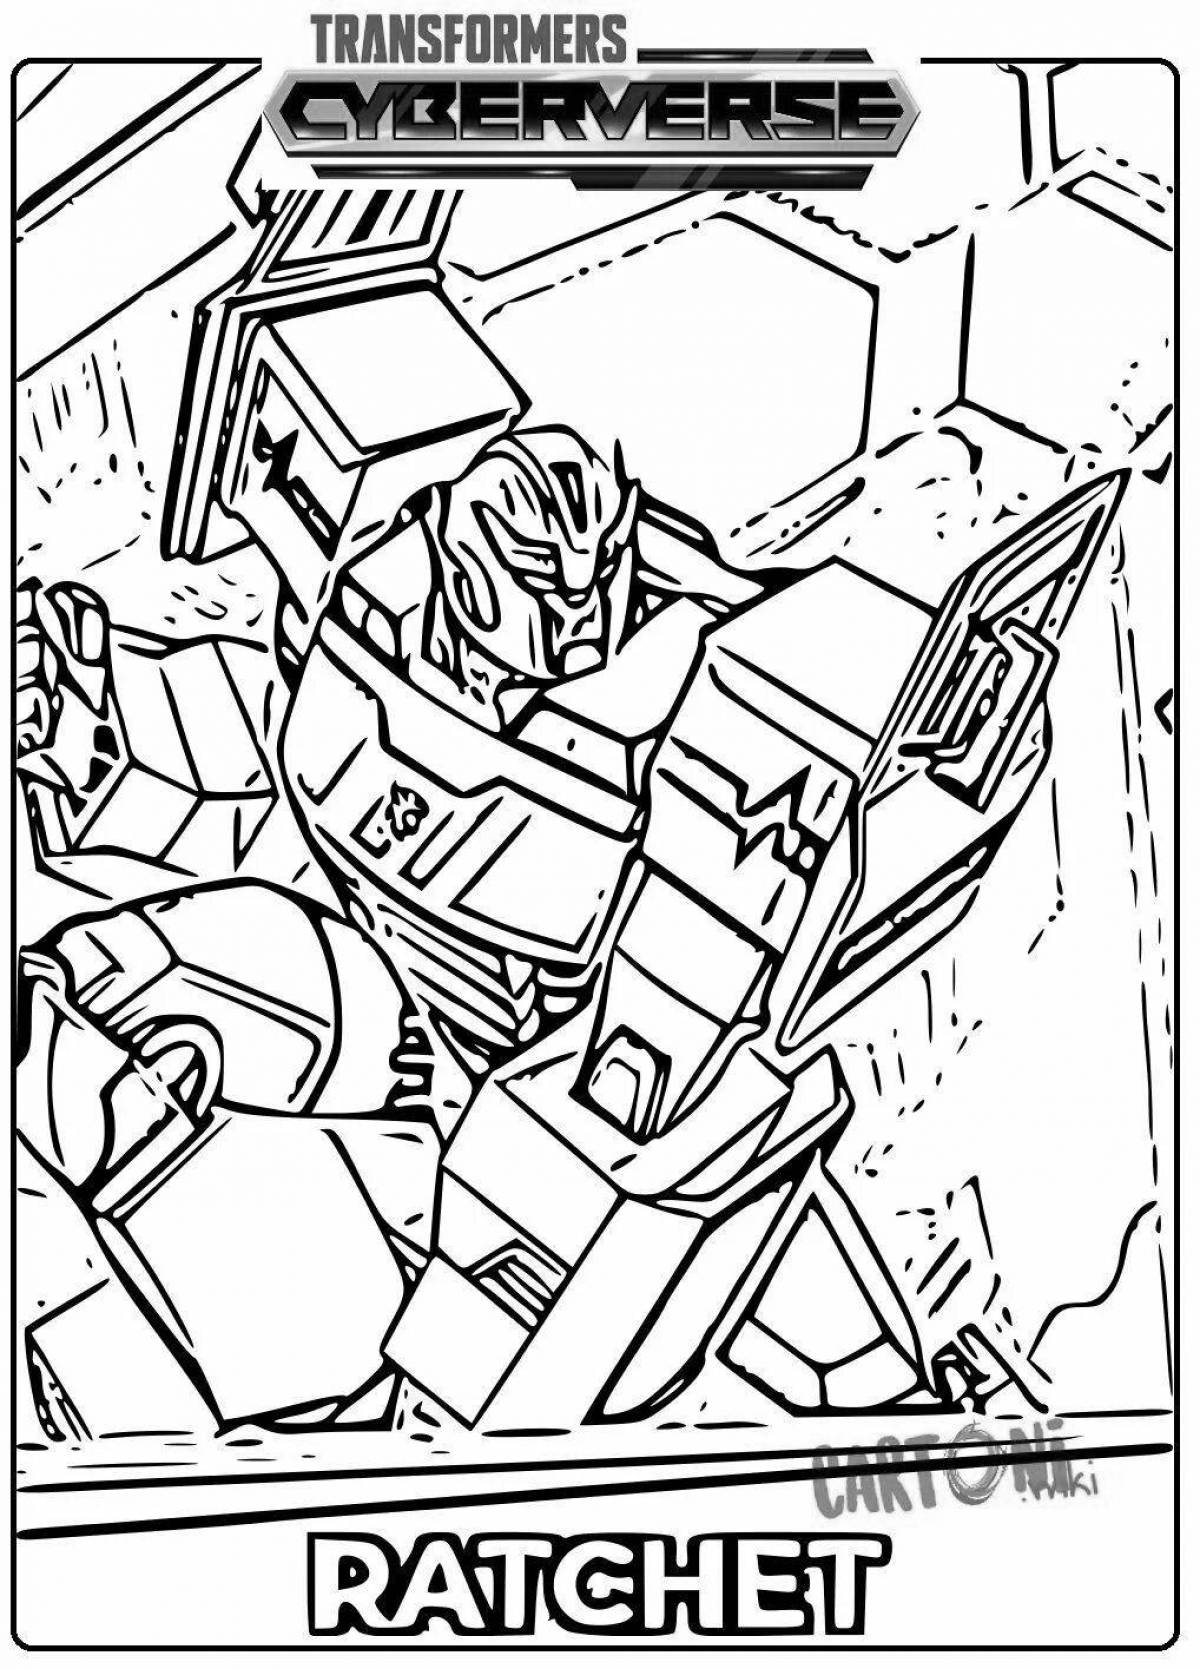 Coloring page amazing transformers ratchet